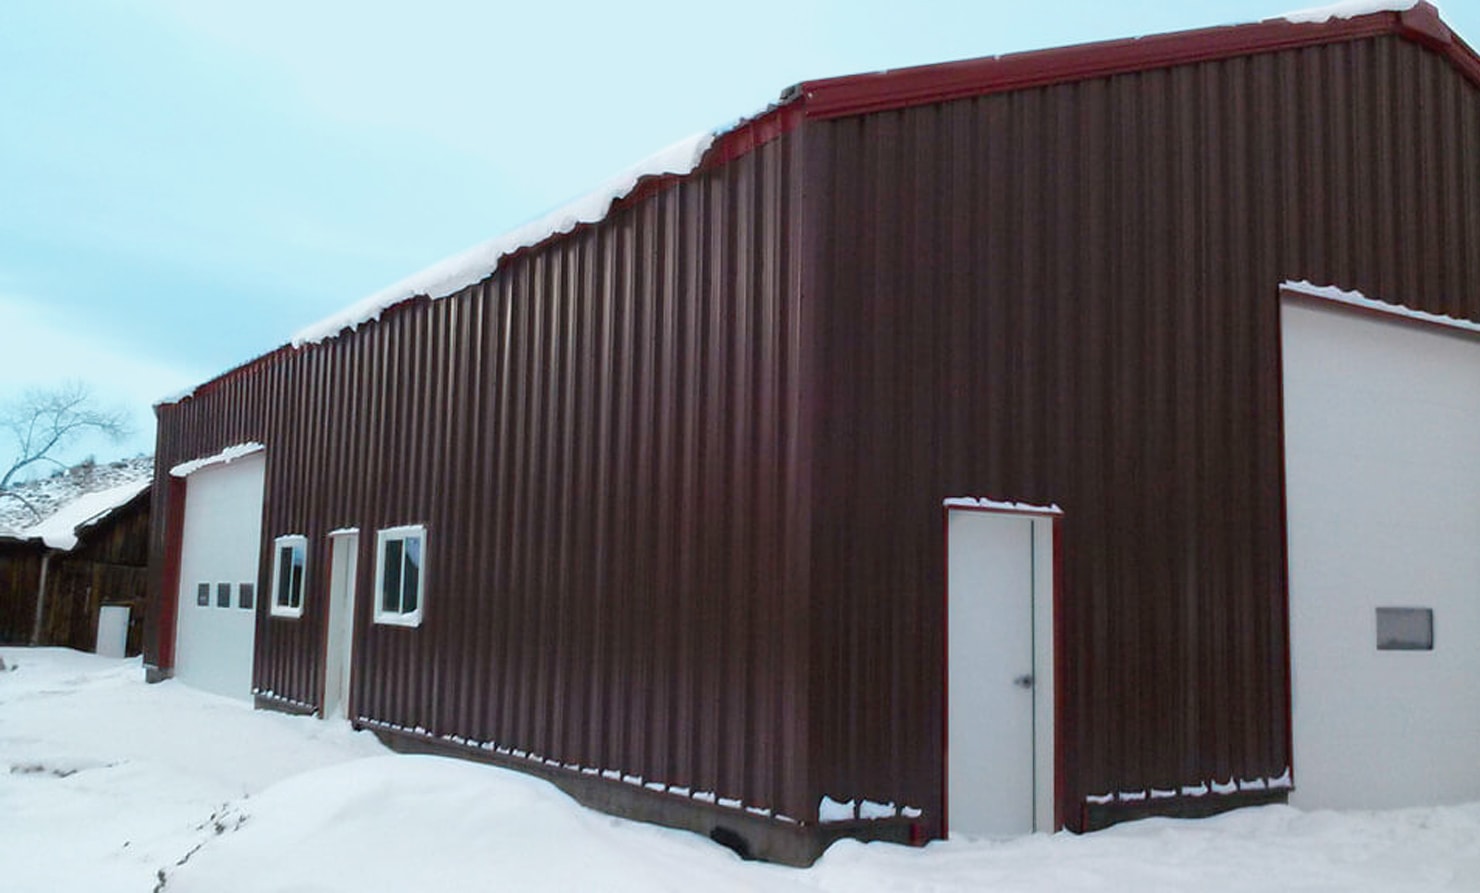 Steel Building Engineered for Snow